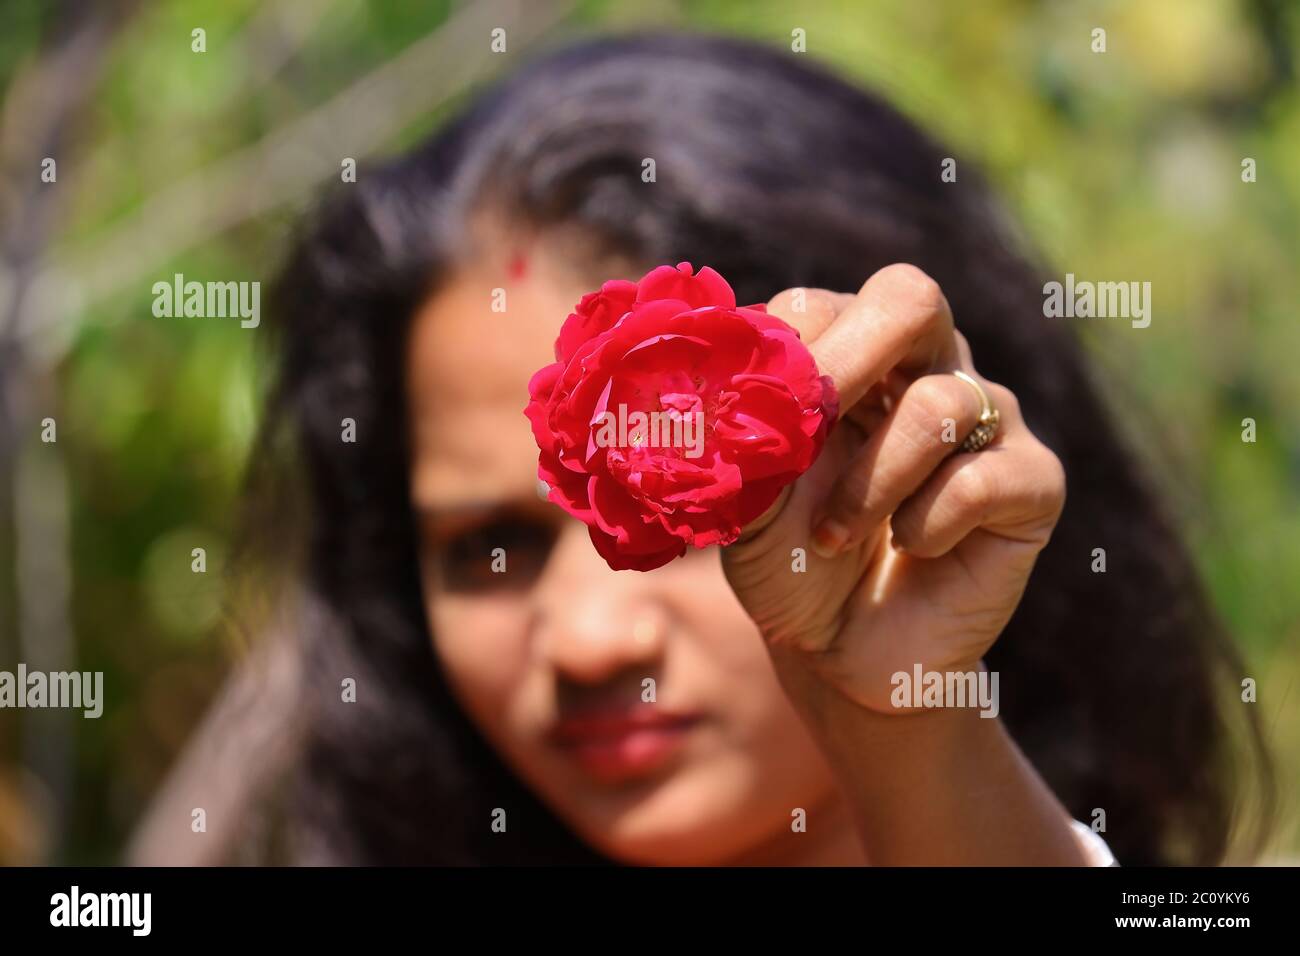 The blurred face of a young girl giving a red rose flower in open hairs Stock Photo